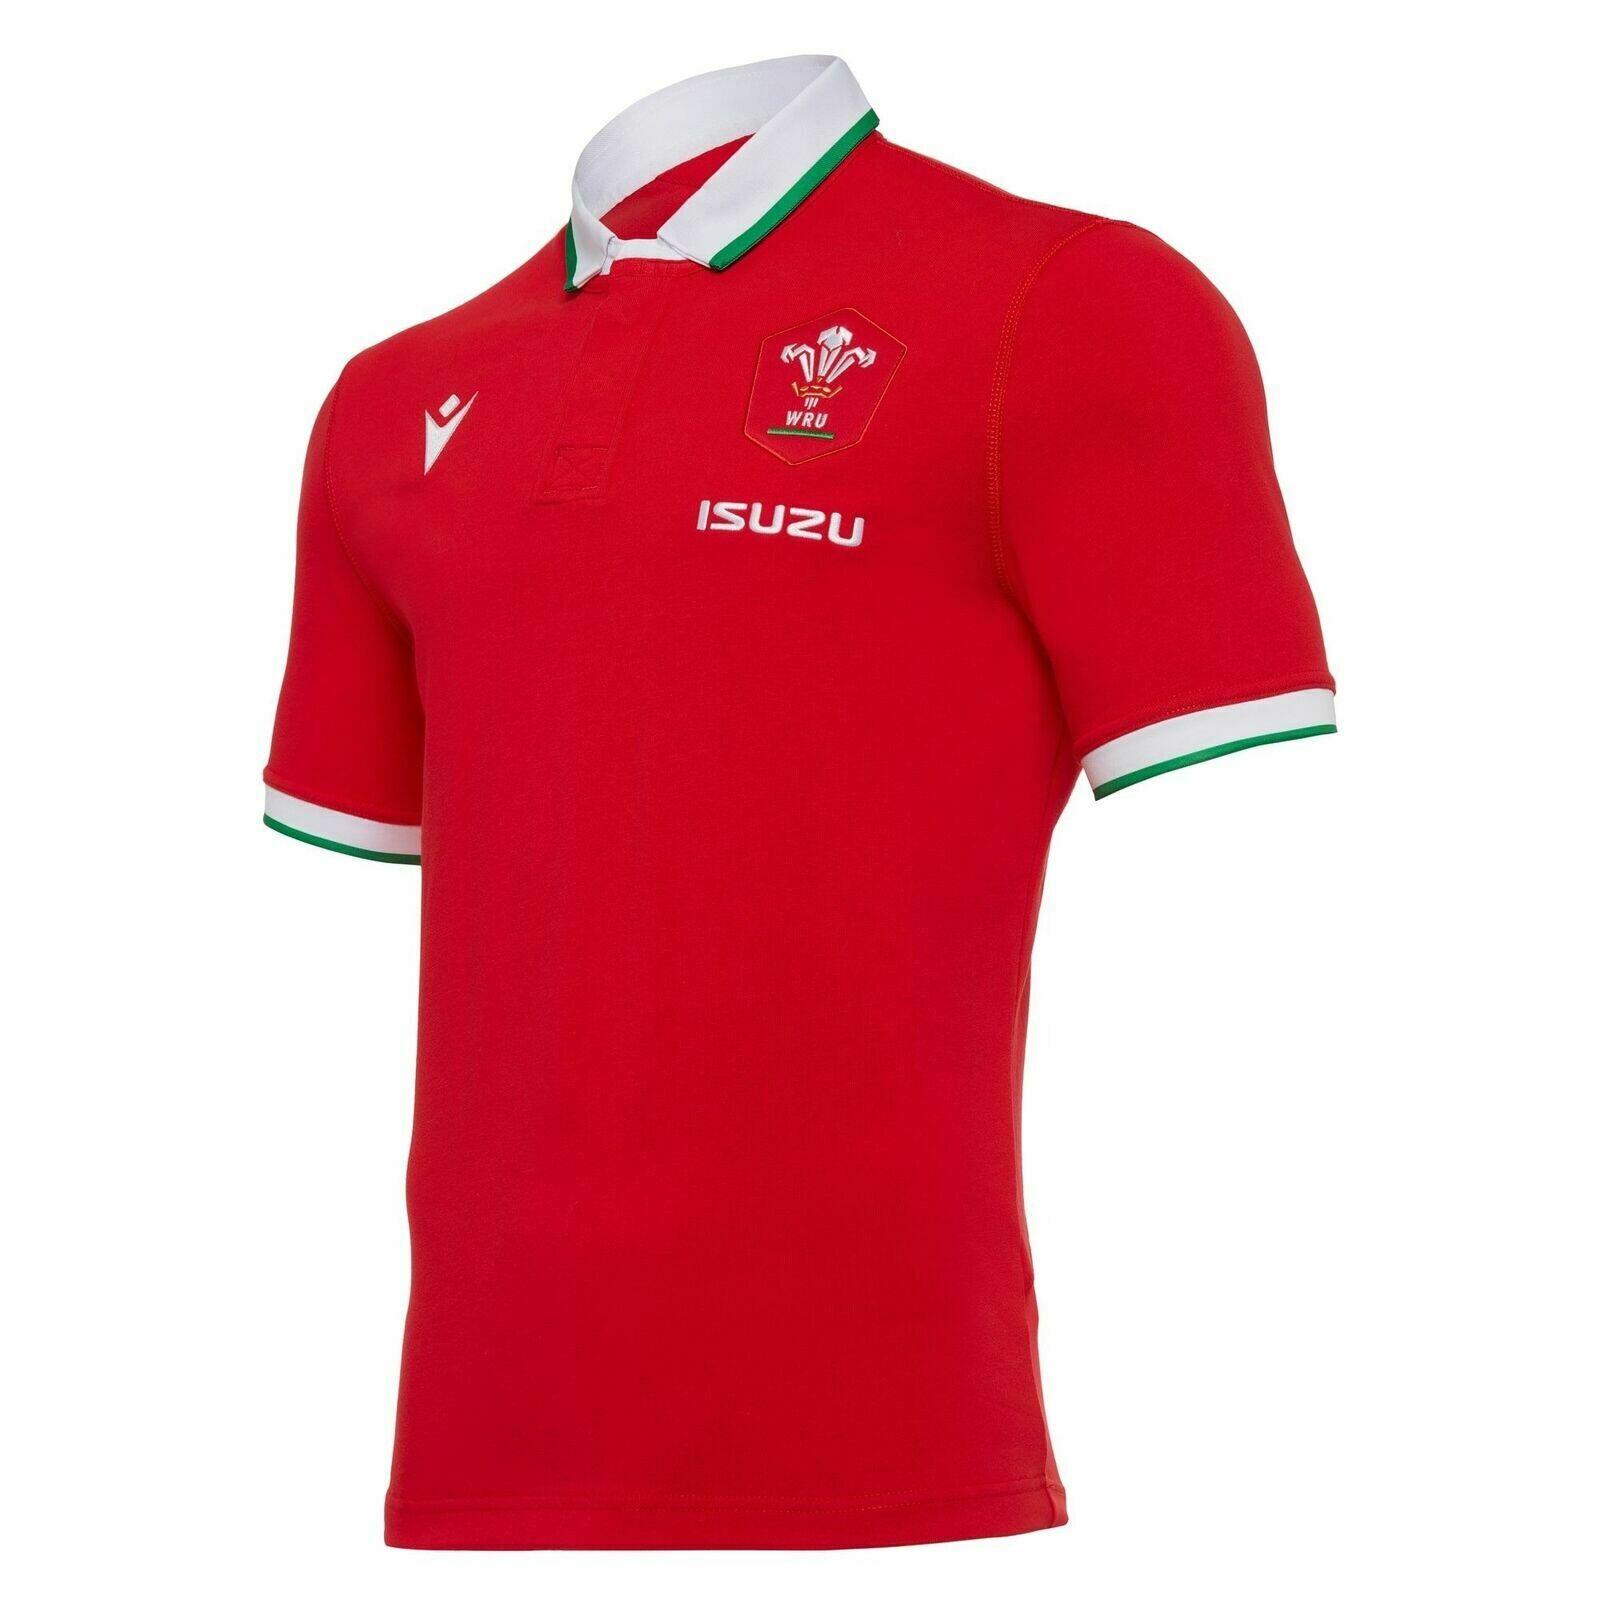 Macron Wales WRU Mens Home Cotton Rugby Shirt 58125445 Red 1/4